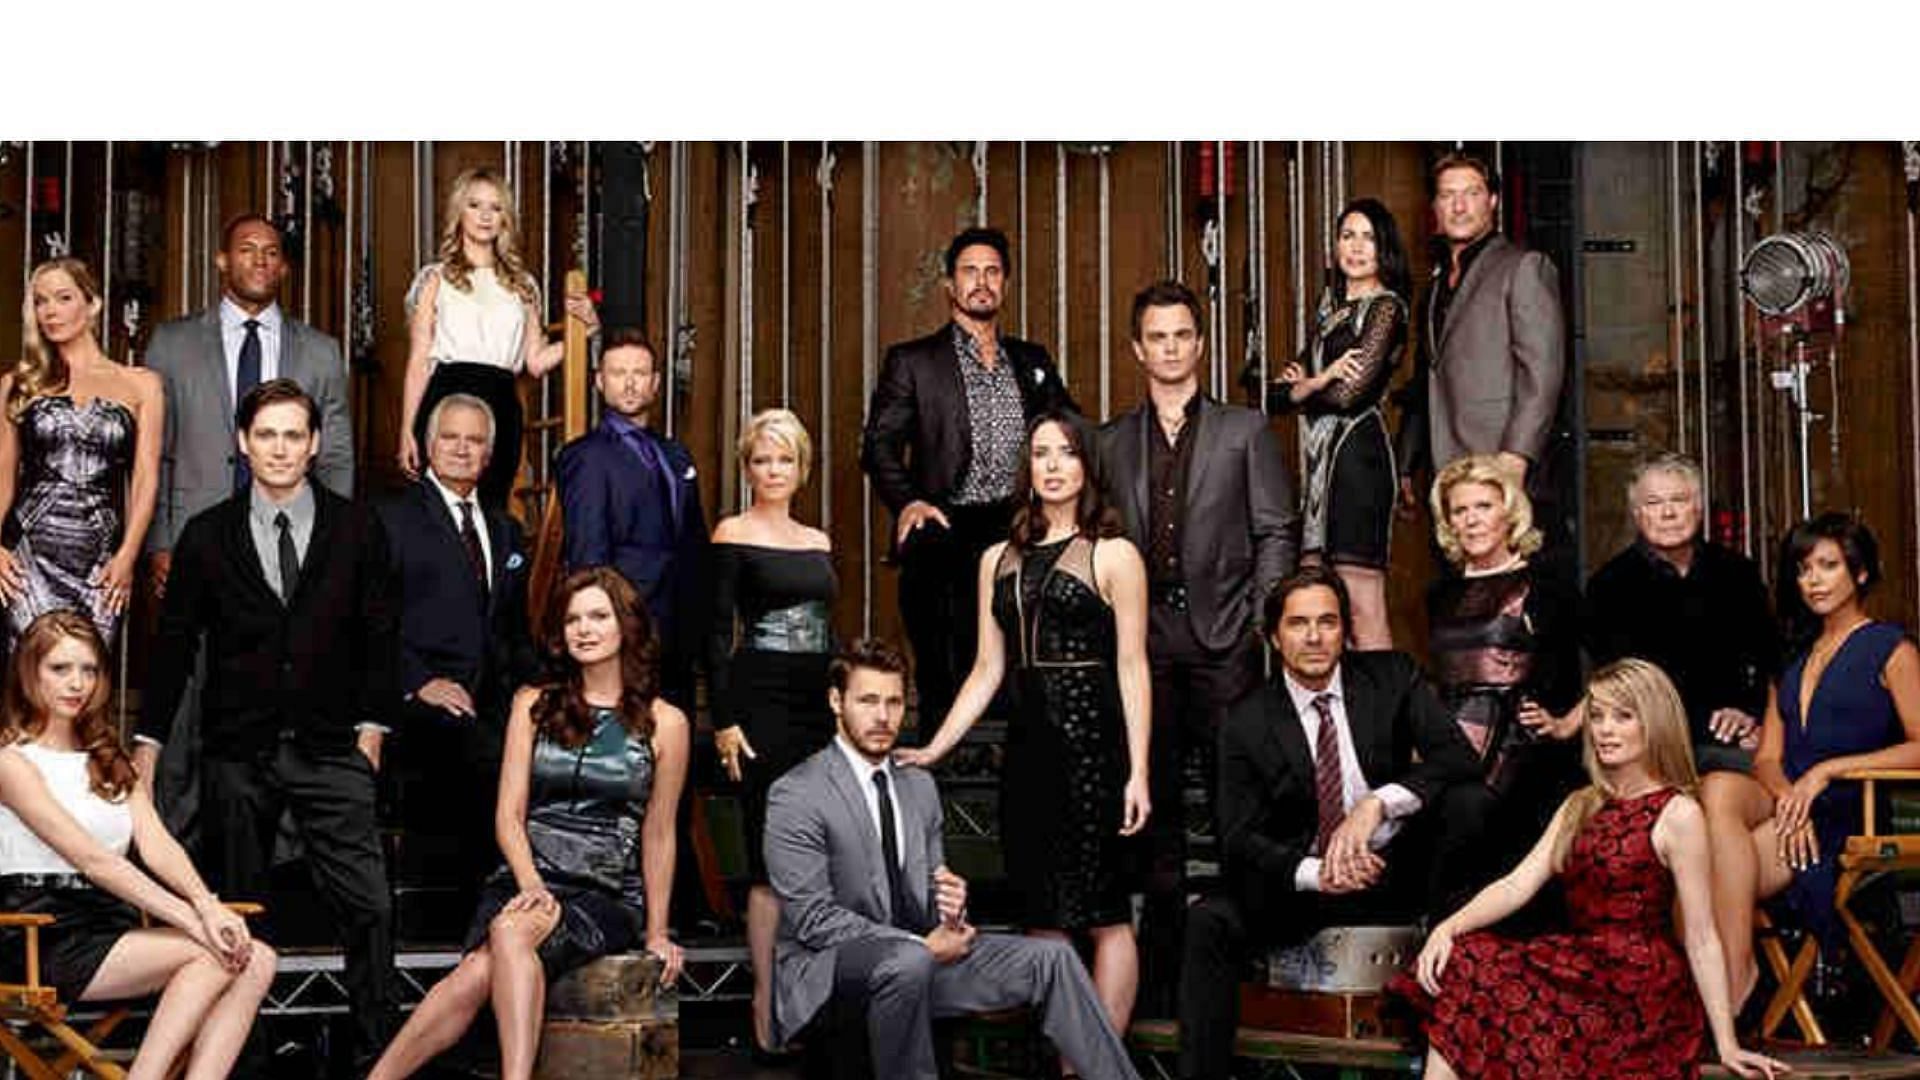 A still of the cast of The Bold and the Beautiful (Image via IMDb)